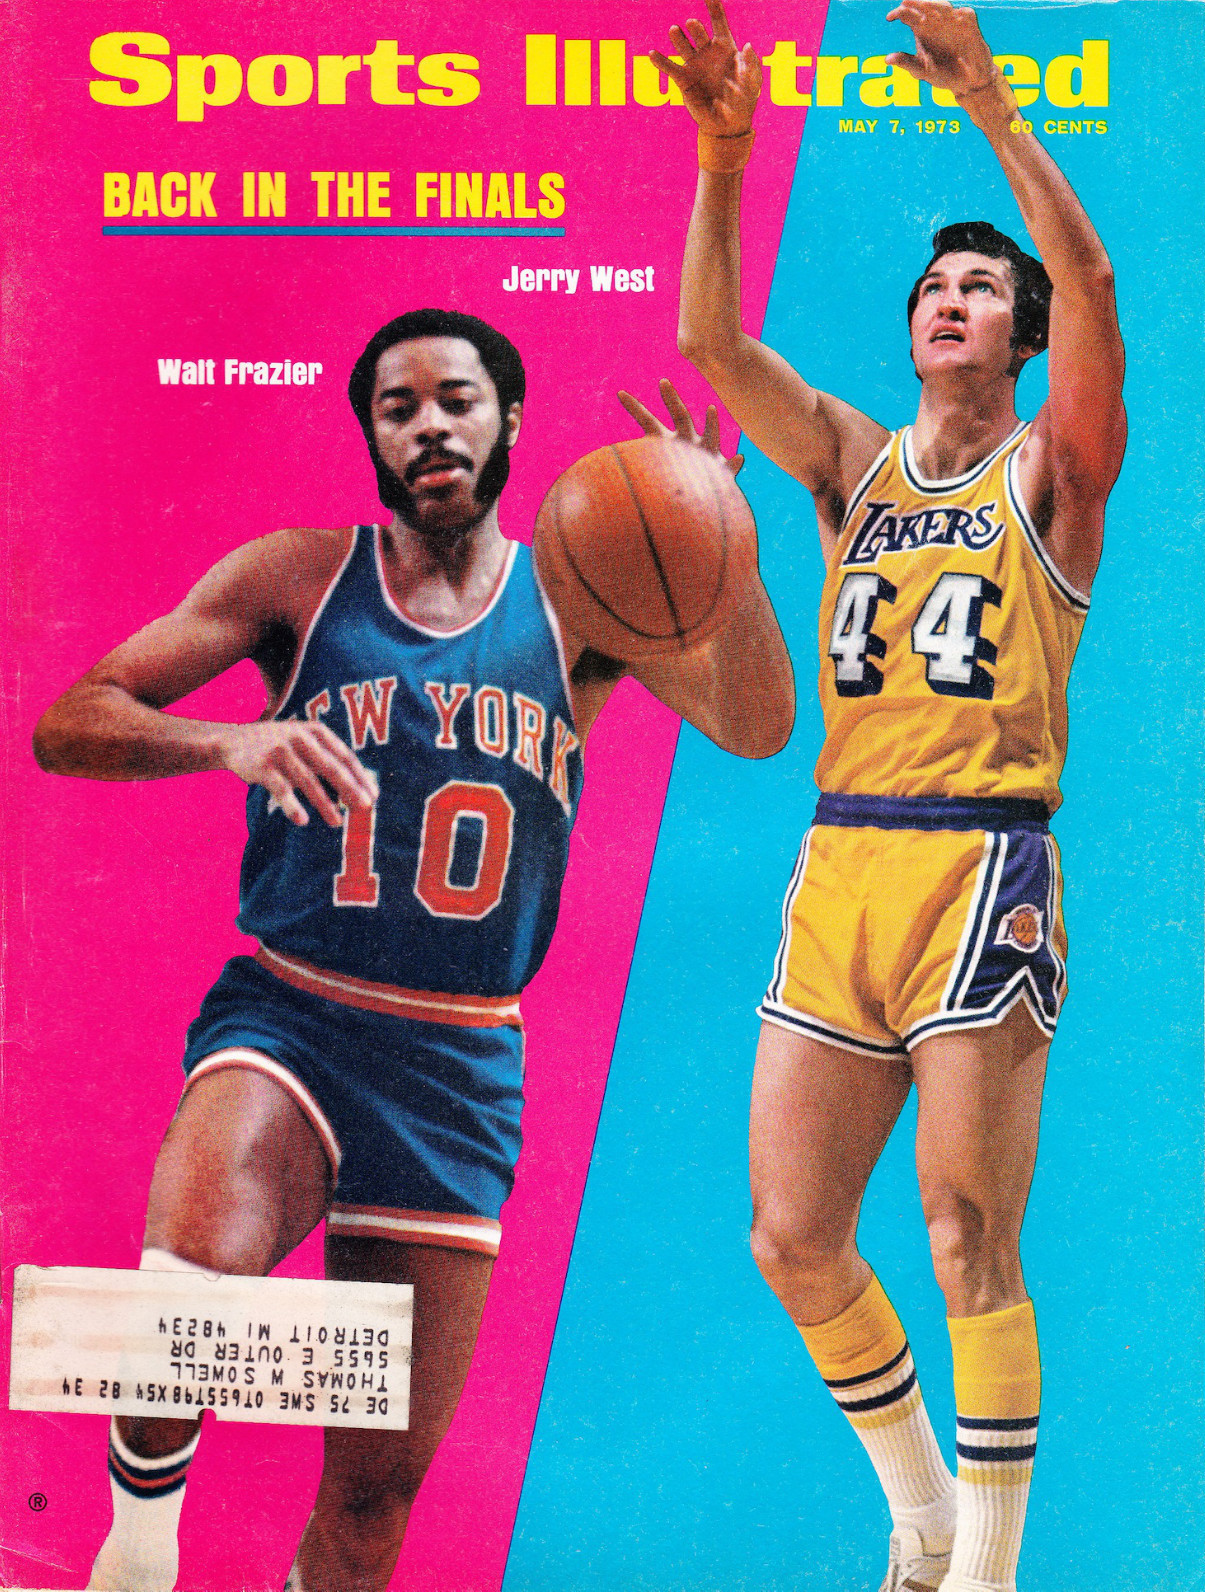 Psychadelic Knicks Sports Illustrated Covers From the 60s and 70s